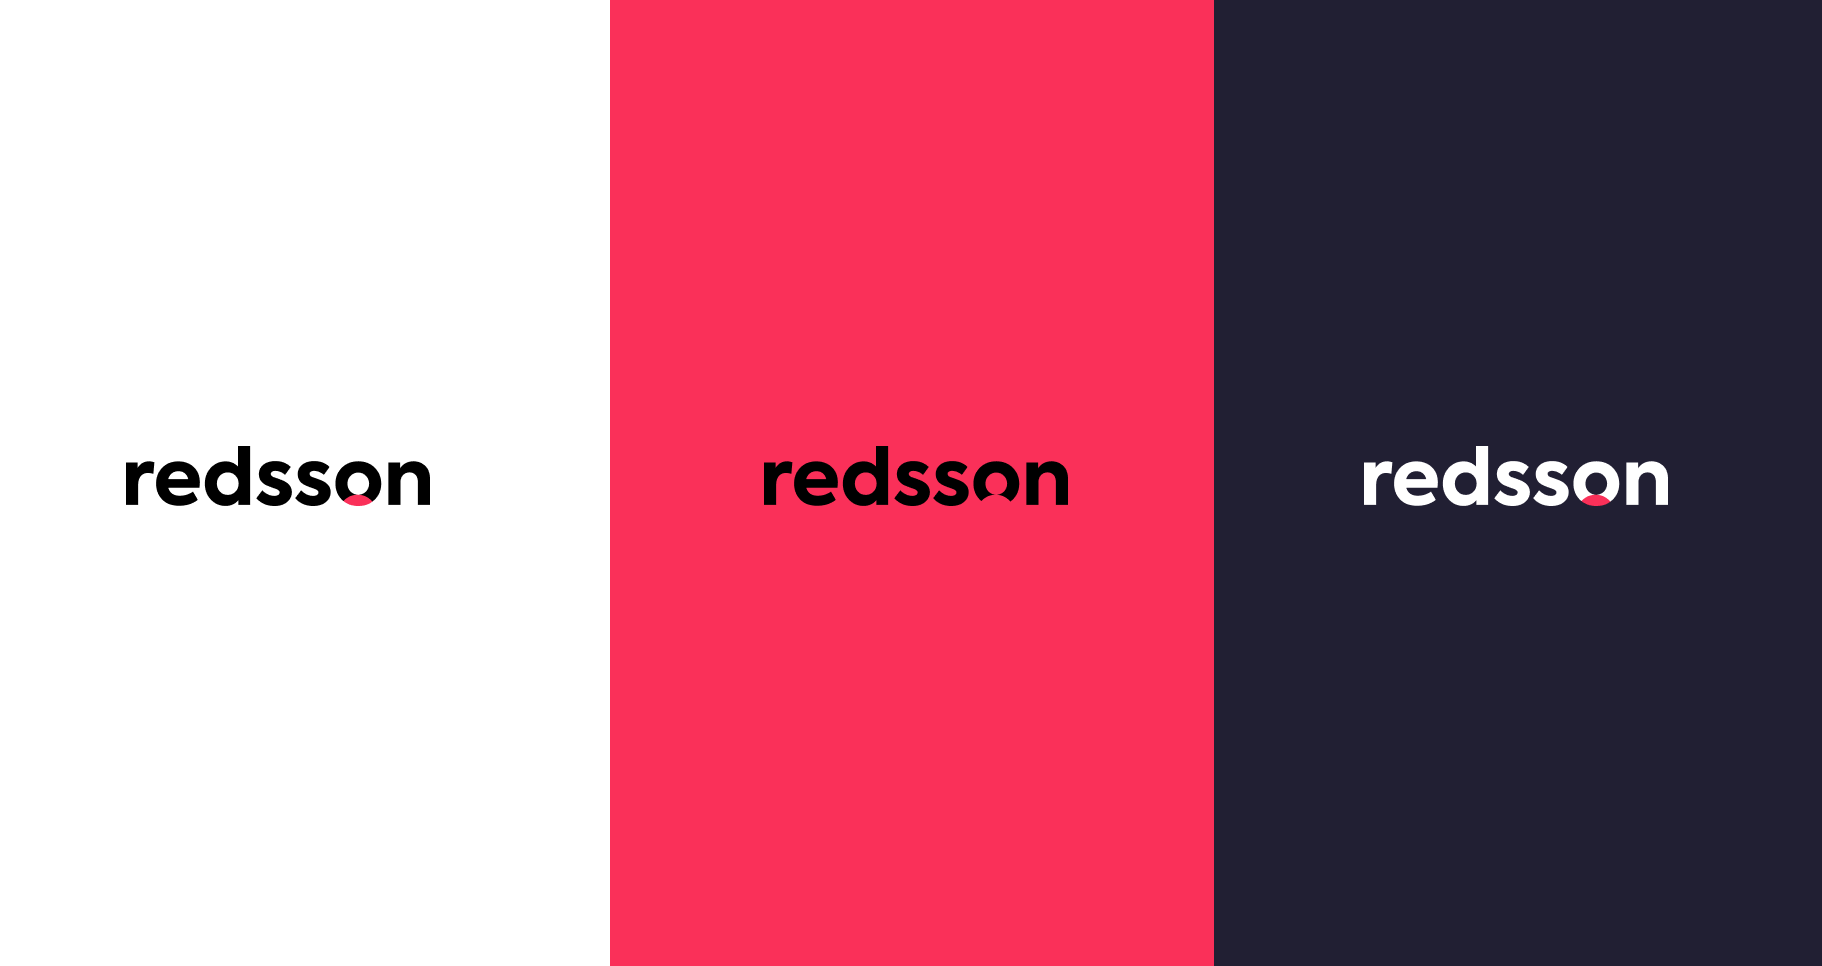 Redsson logos with different background colors